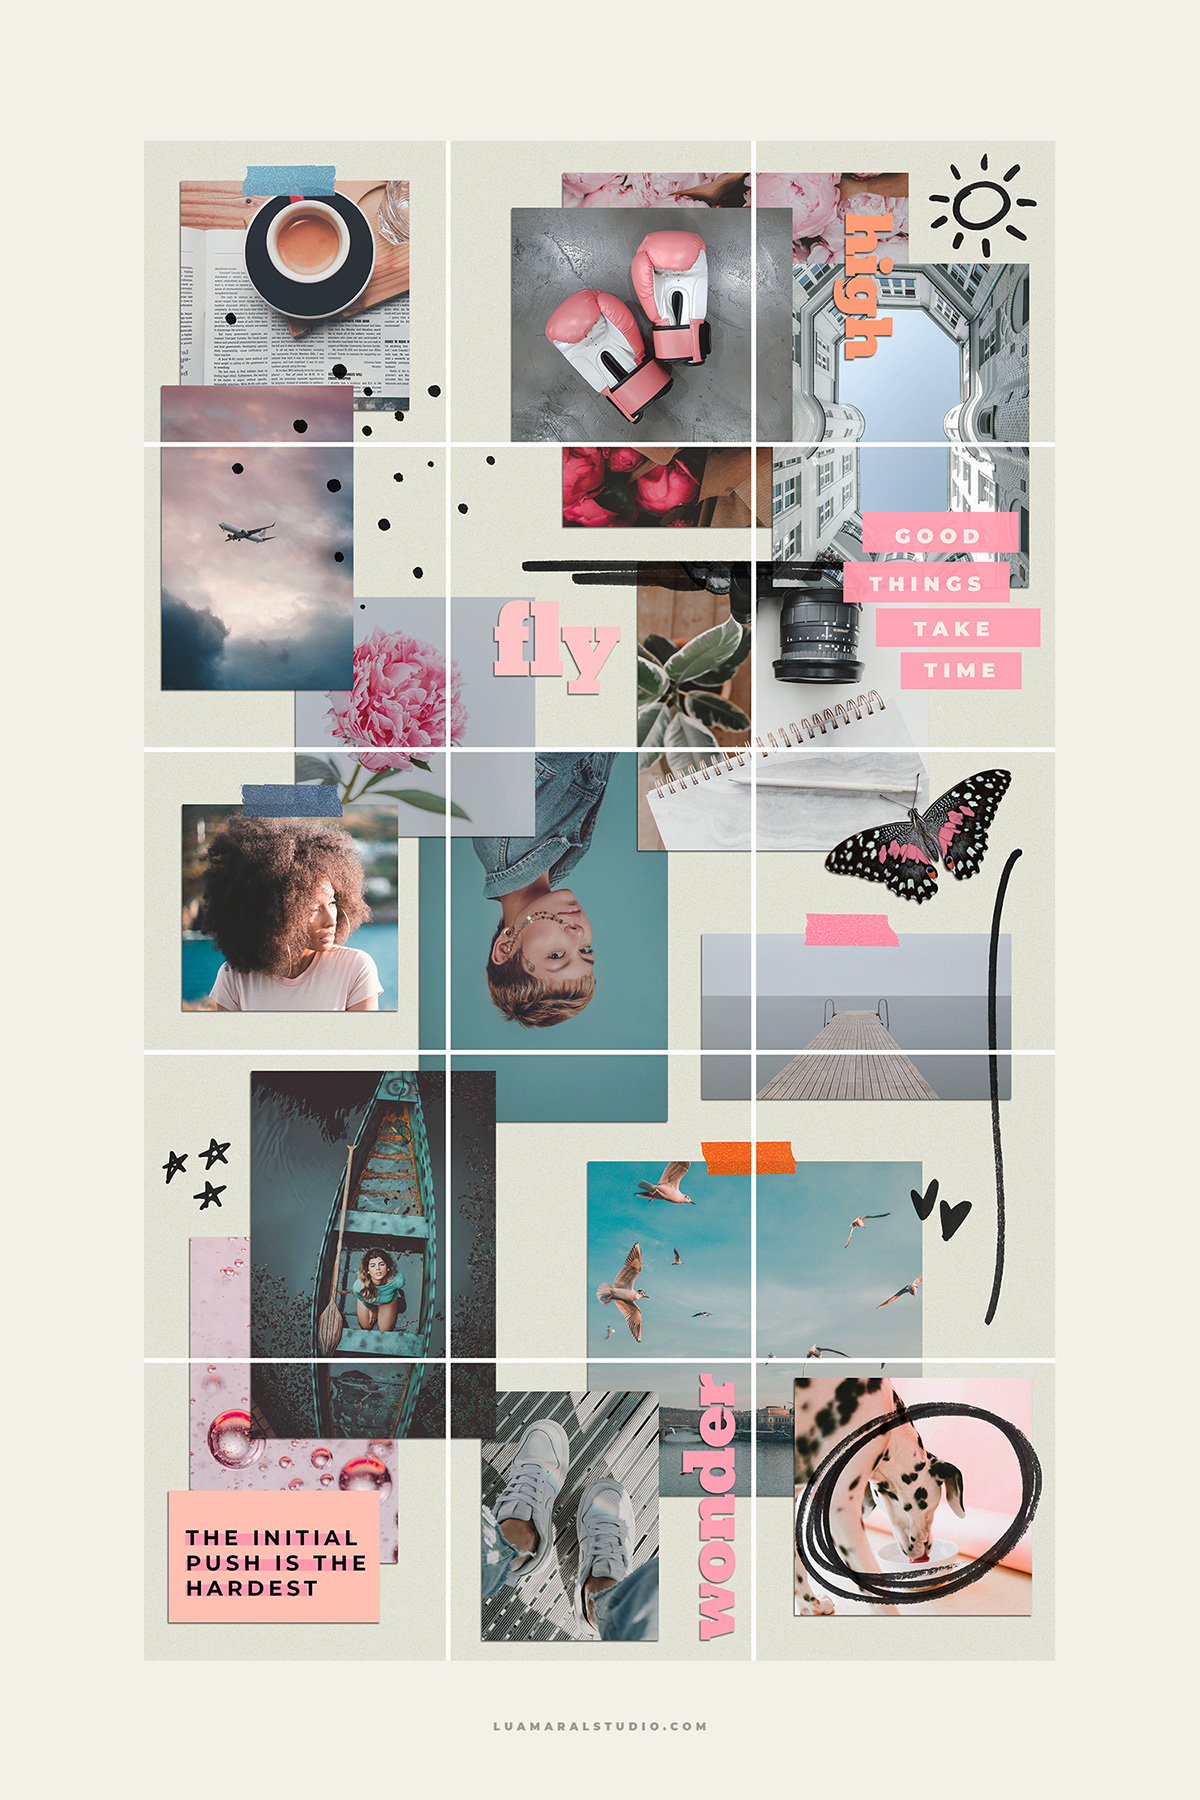 12 Post Instagram Canva Puzzle Feed Design Template Orange Pink Pastell No  Photoshop Instagram Templates Canva Templates Puzzle 